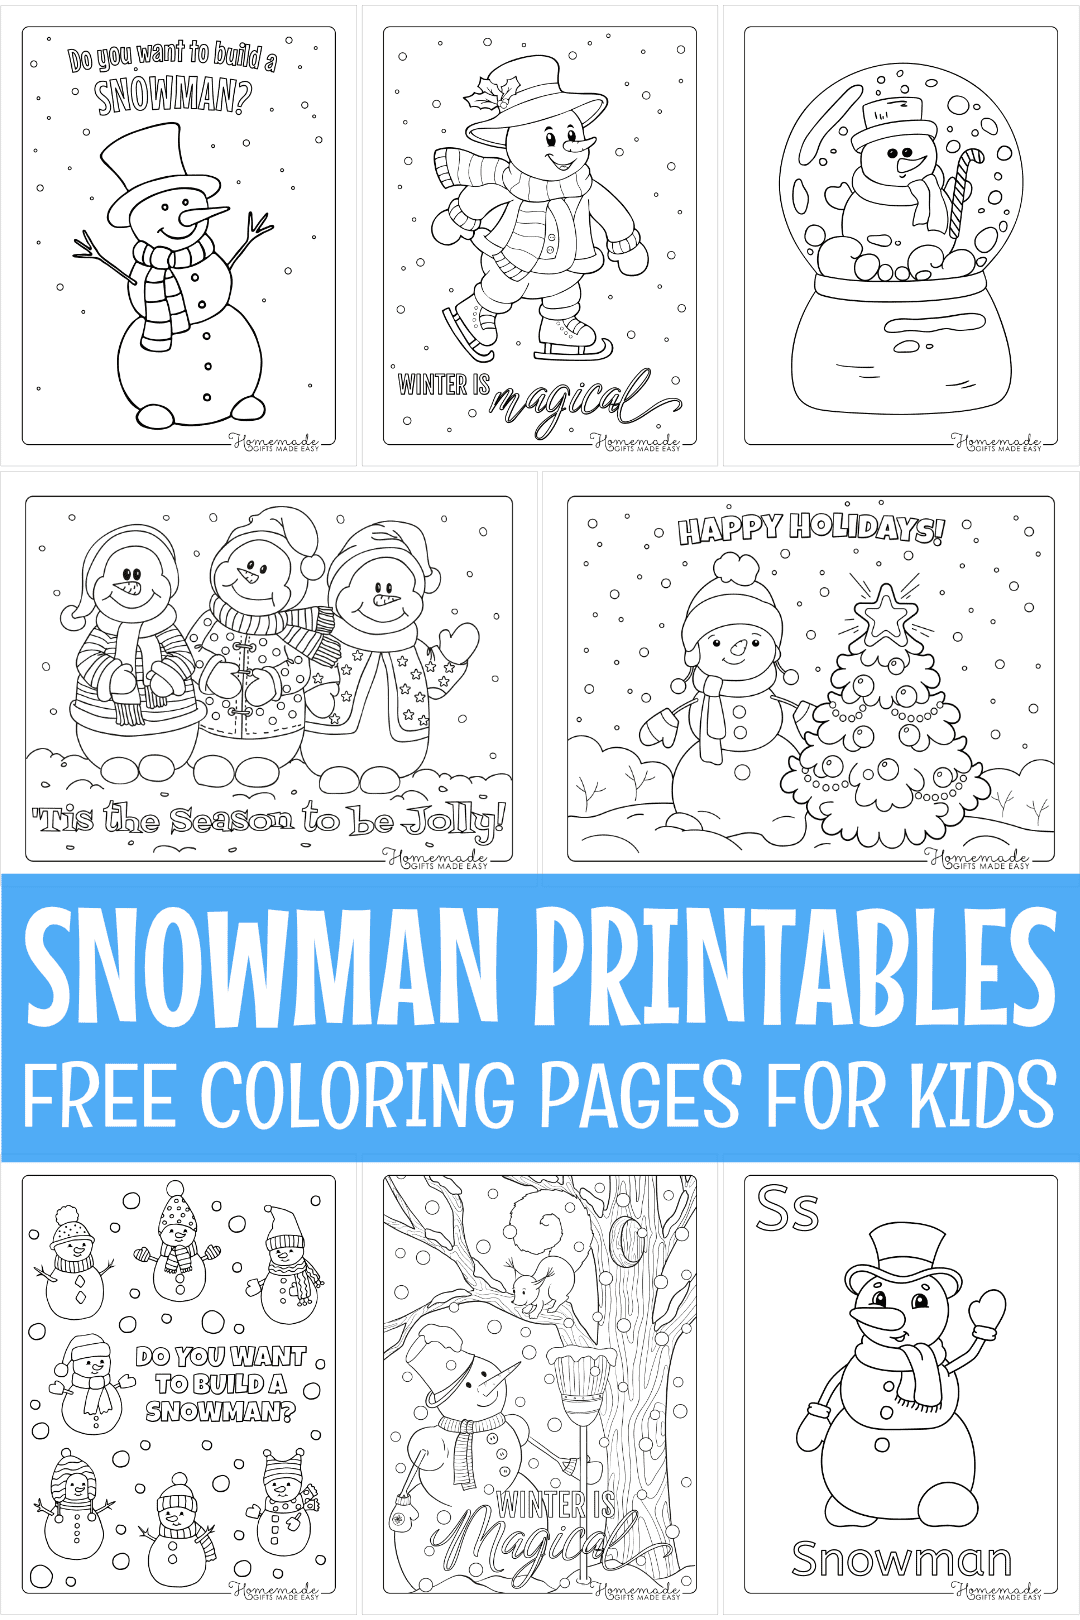 Free Printable Snowman Coloring Pages | 60+ Designs